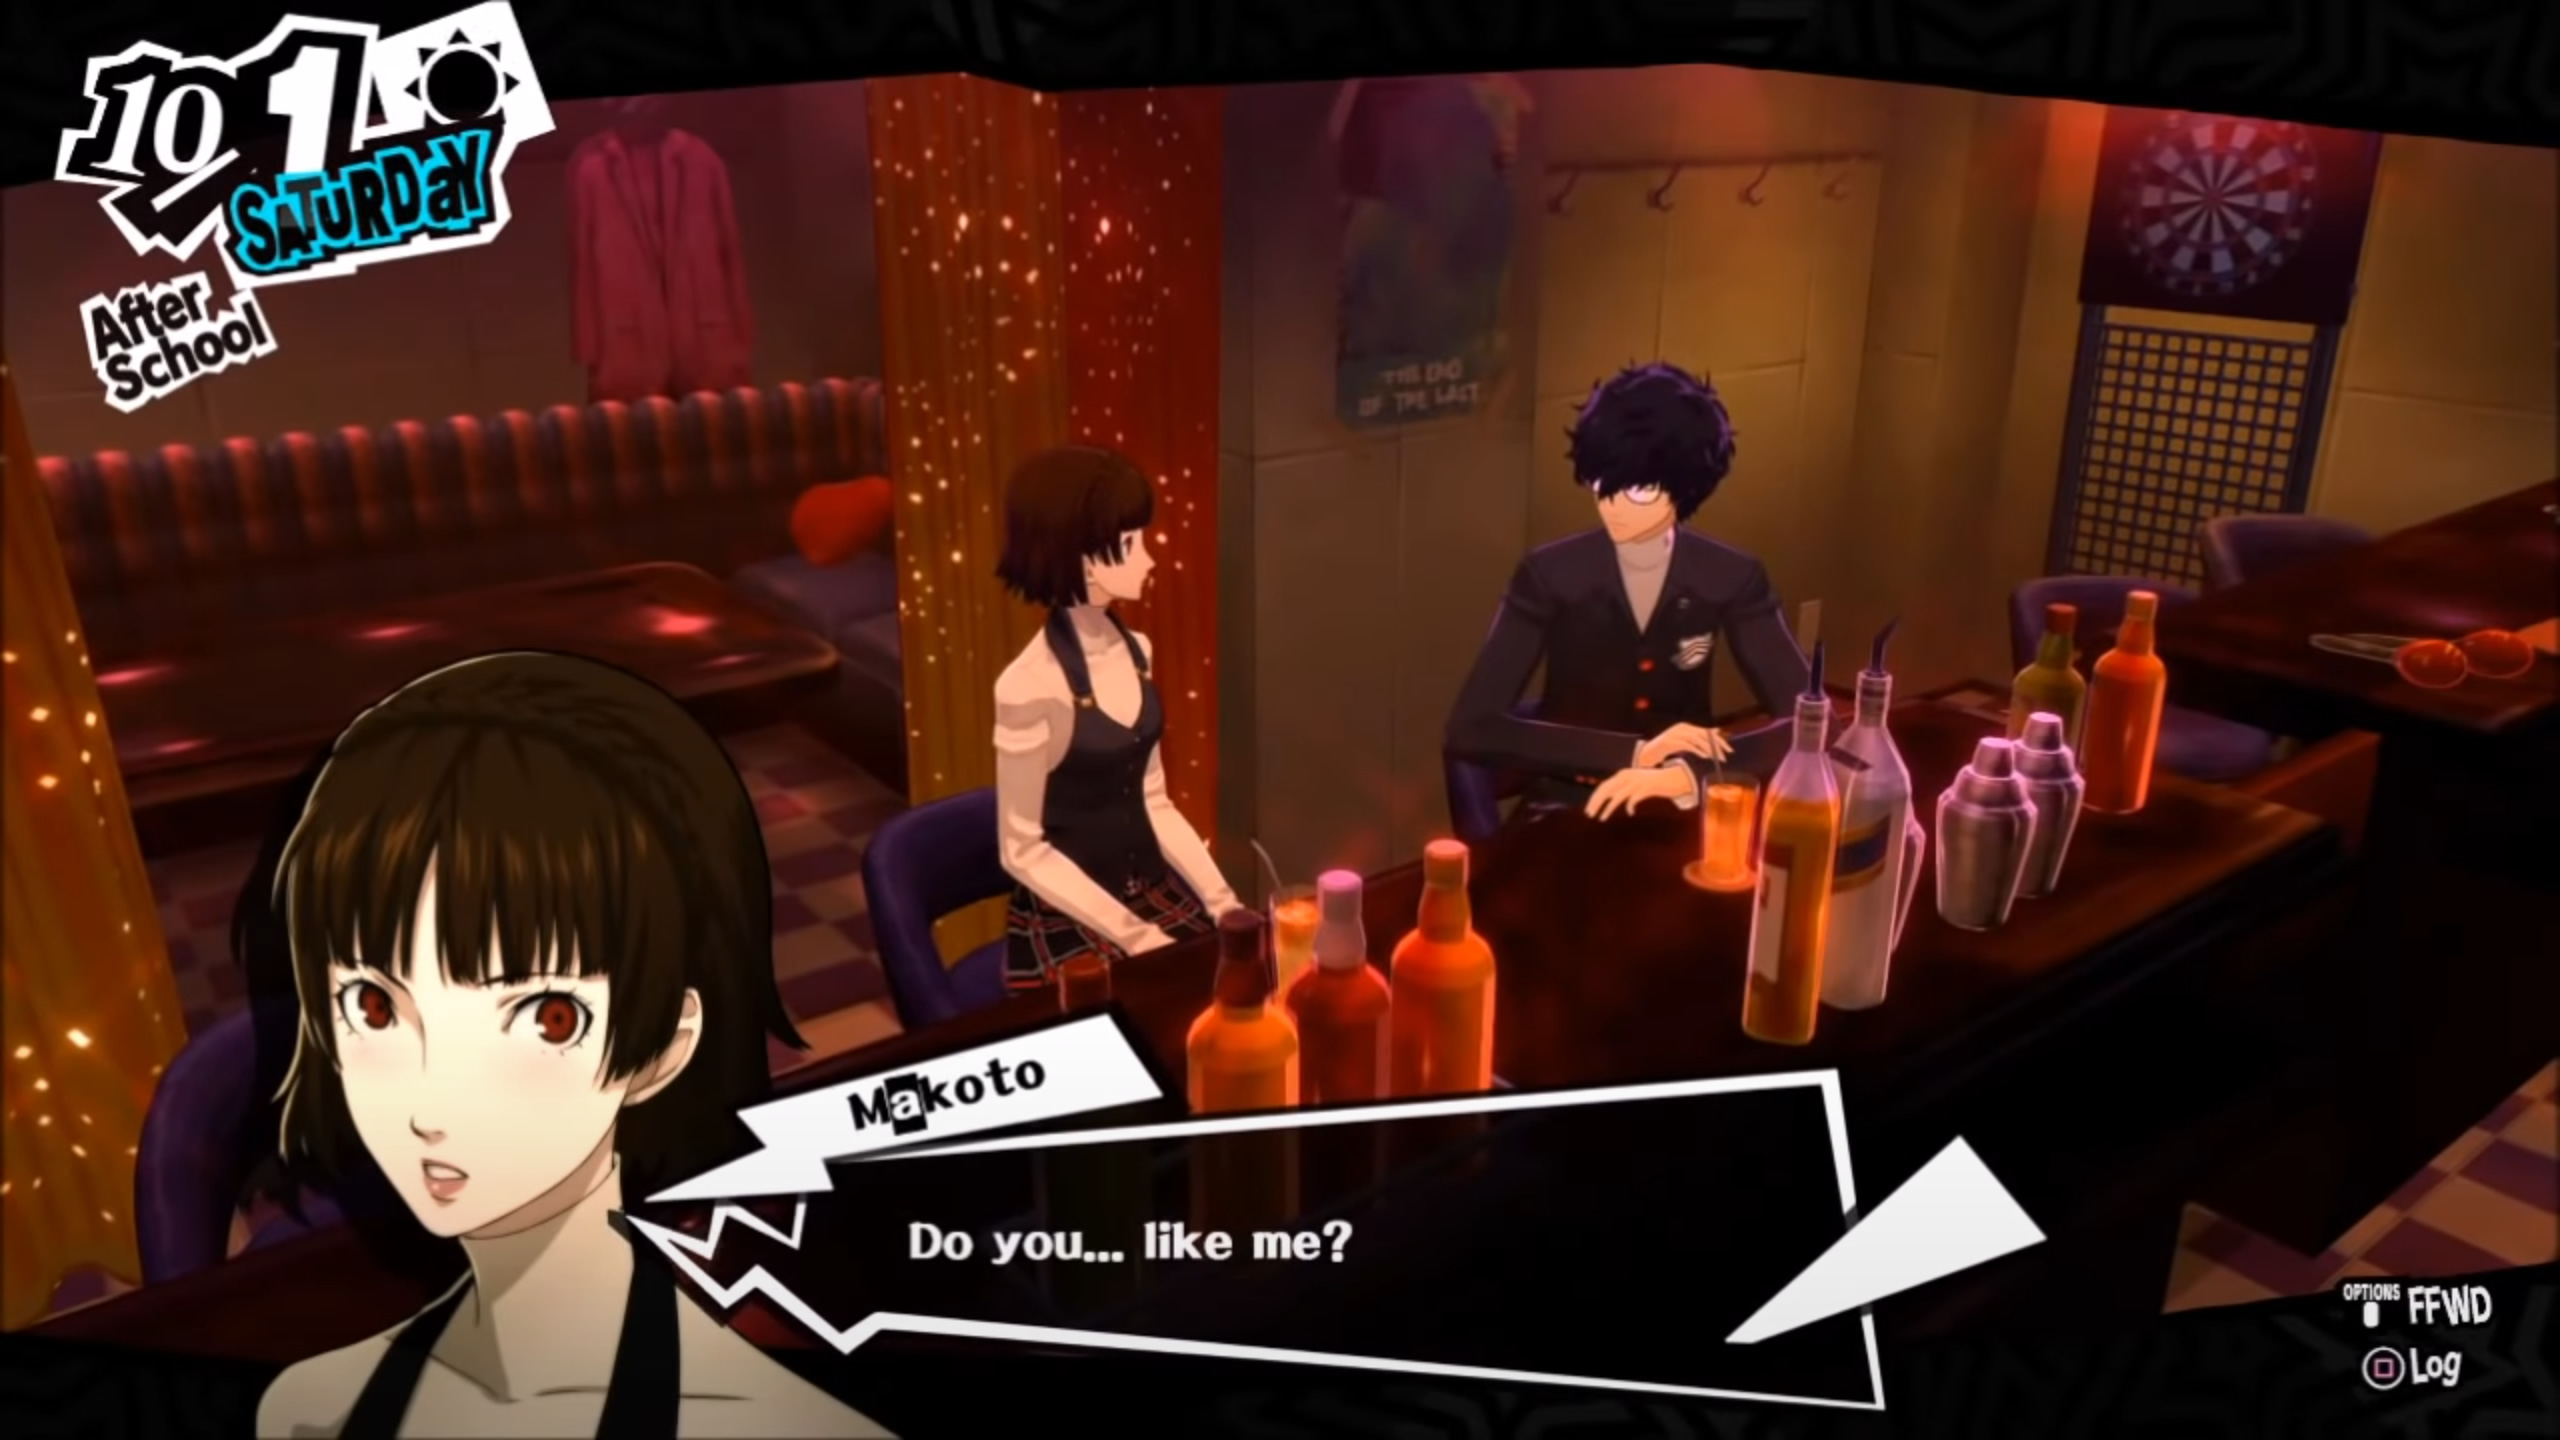 Persona 5 Royal: Romance Options - All Girlfriends and Where to Find Them